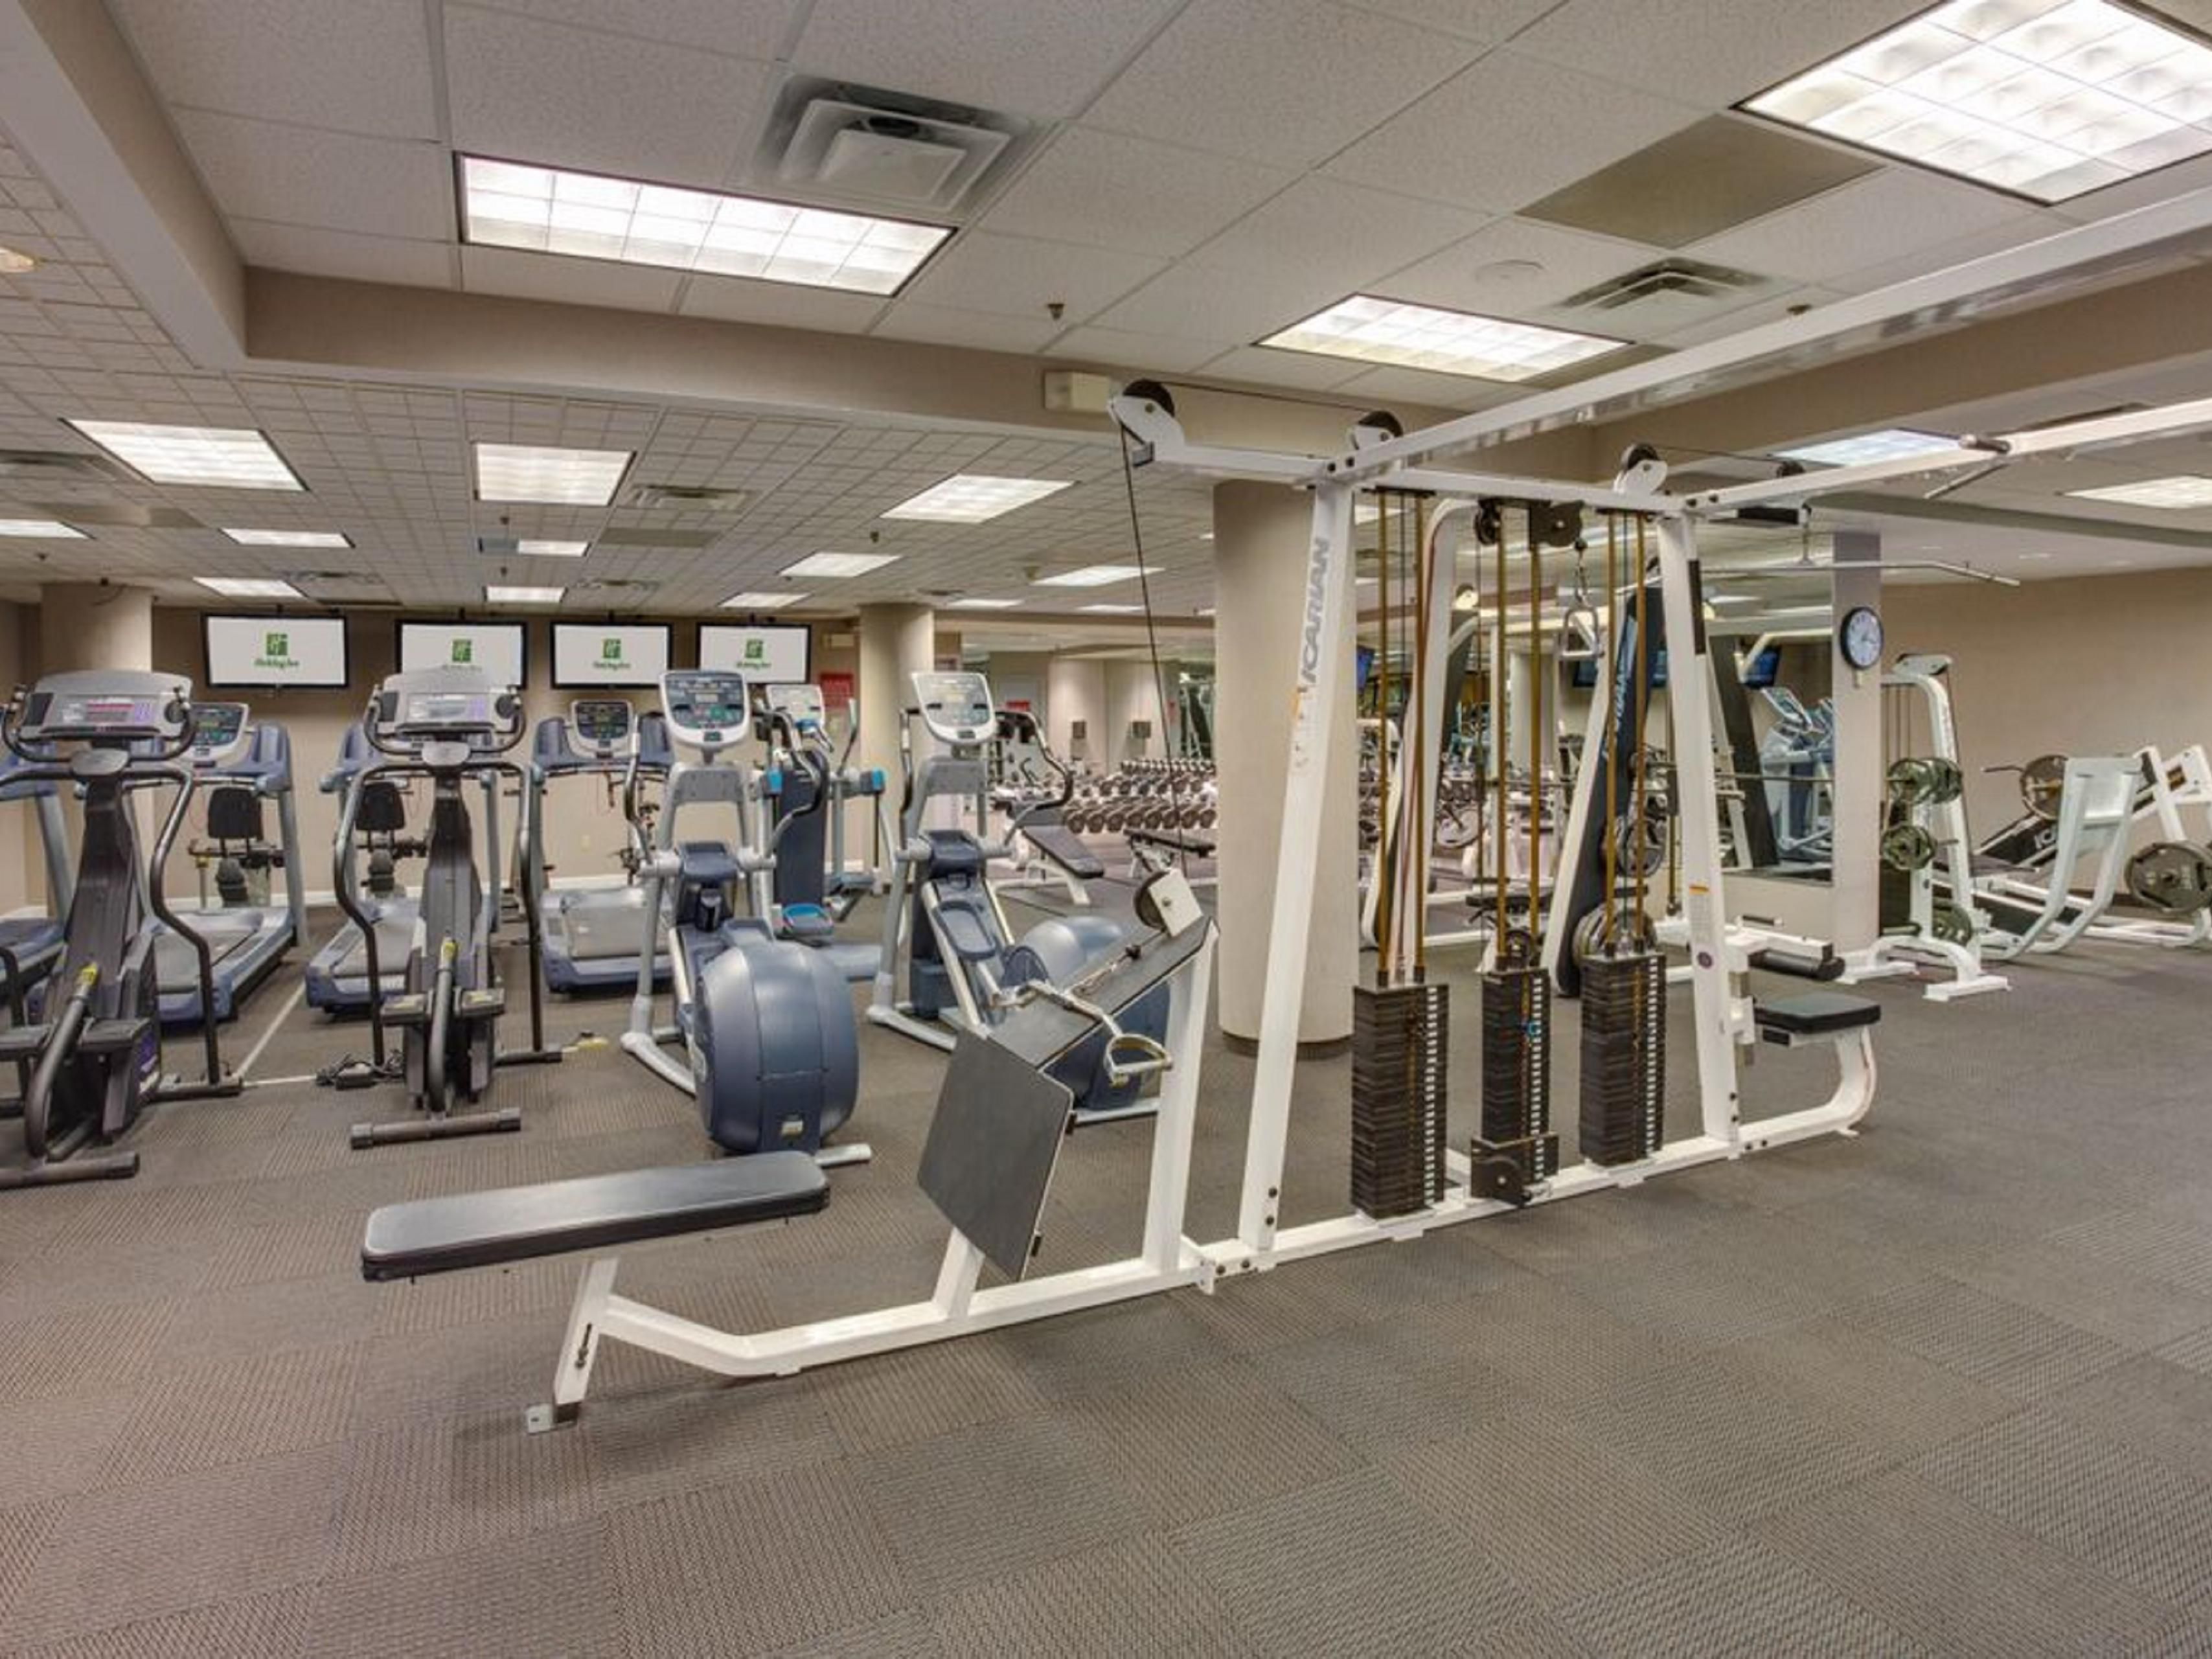 Get your sweat on with our 3,000 square foot fitness center, open 24 hours a day.